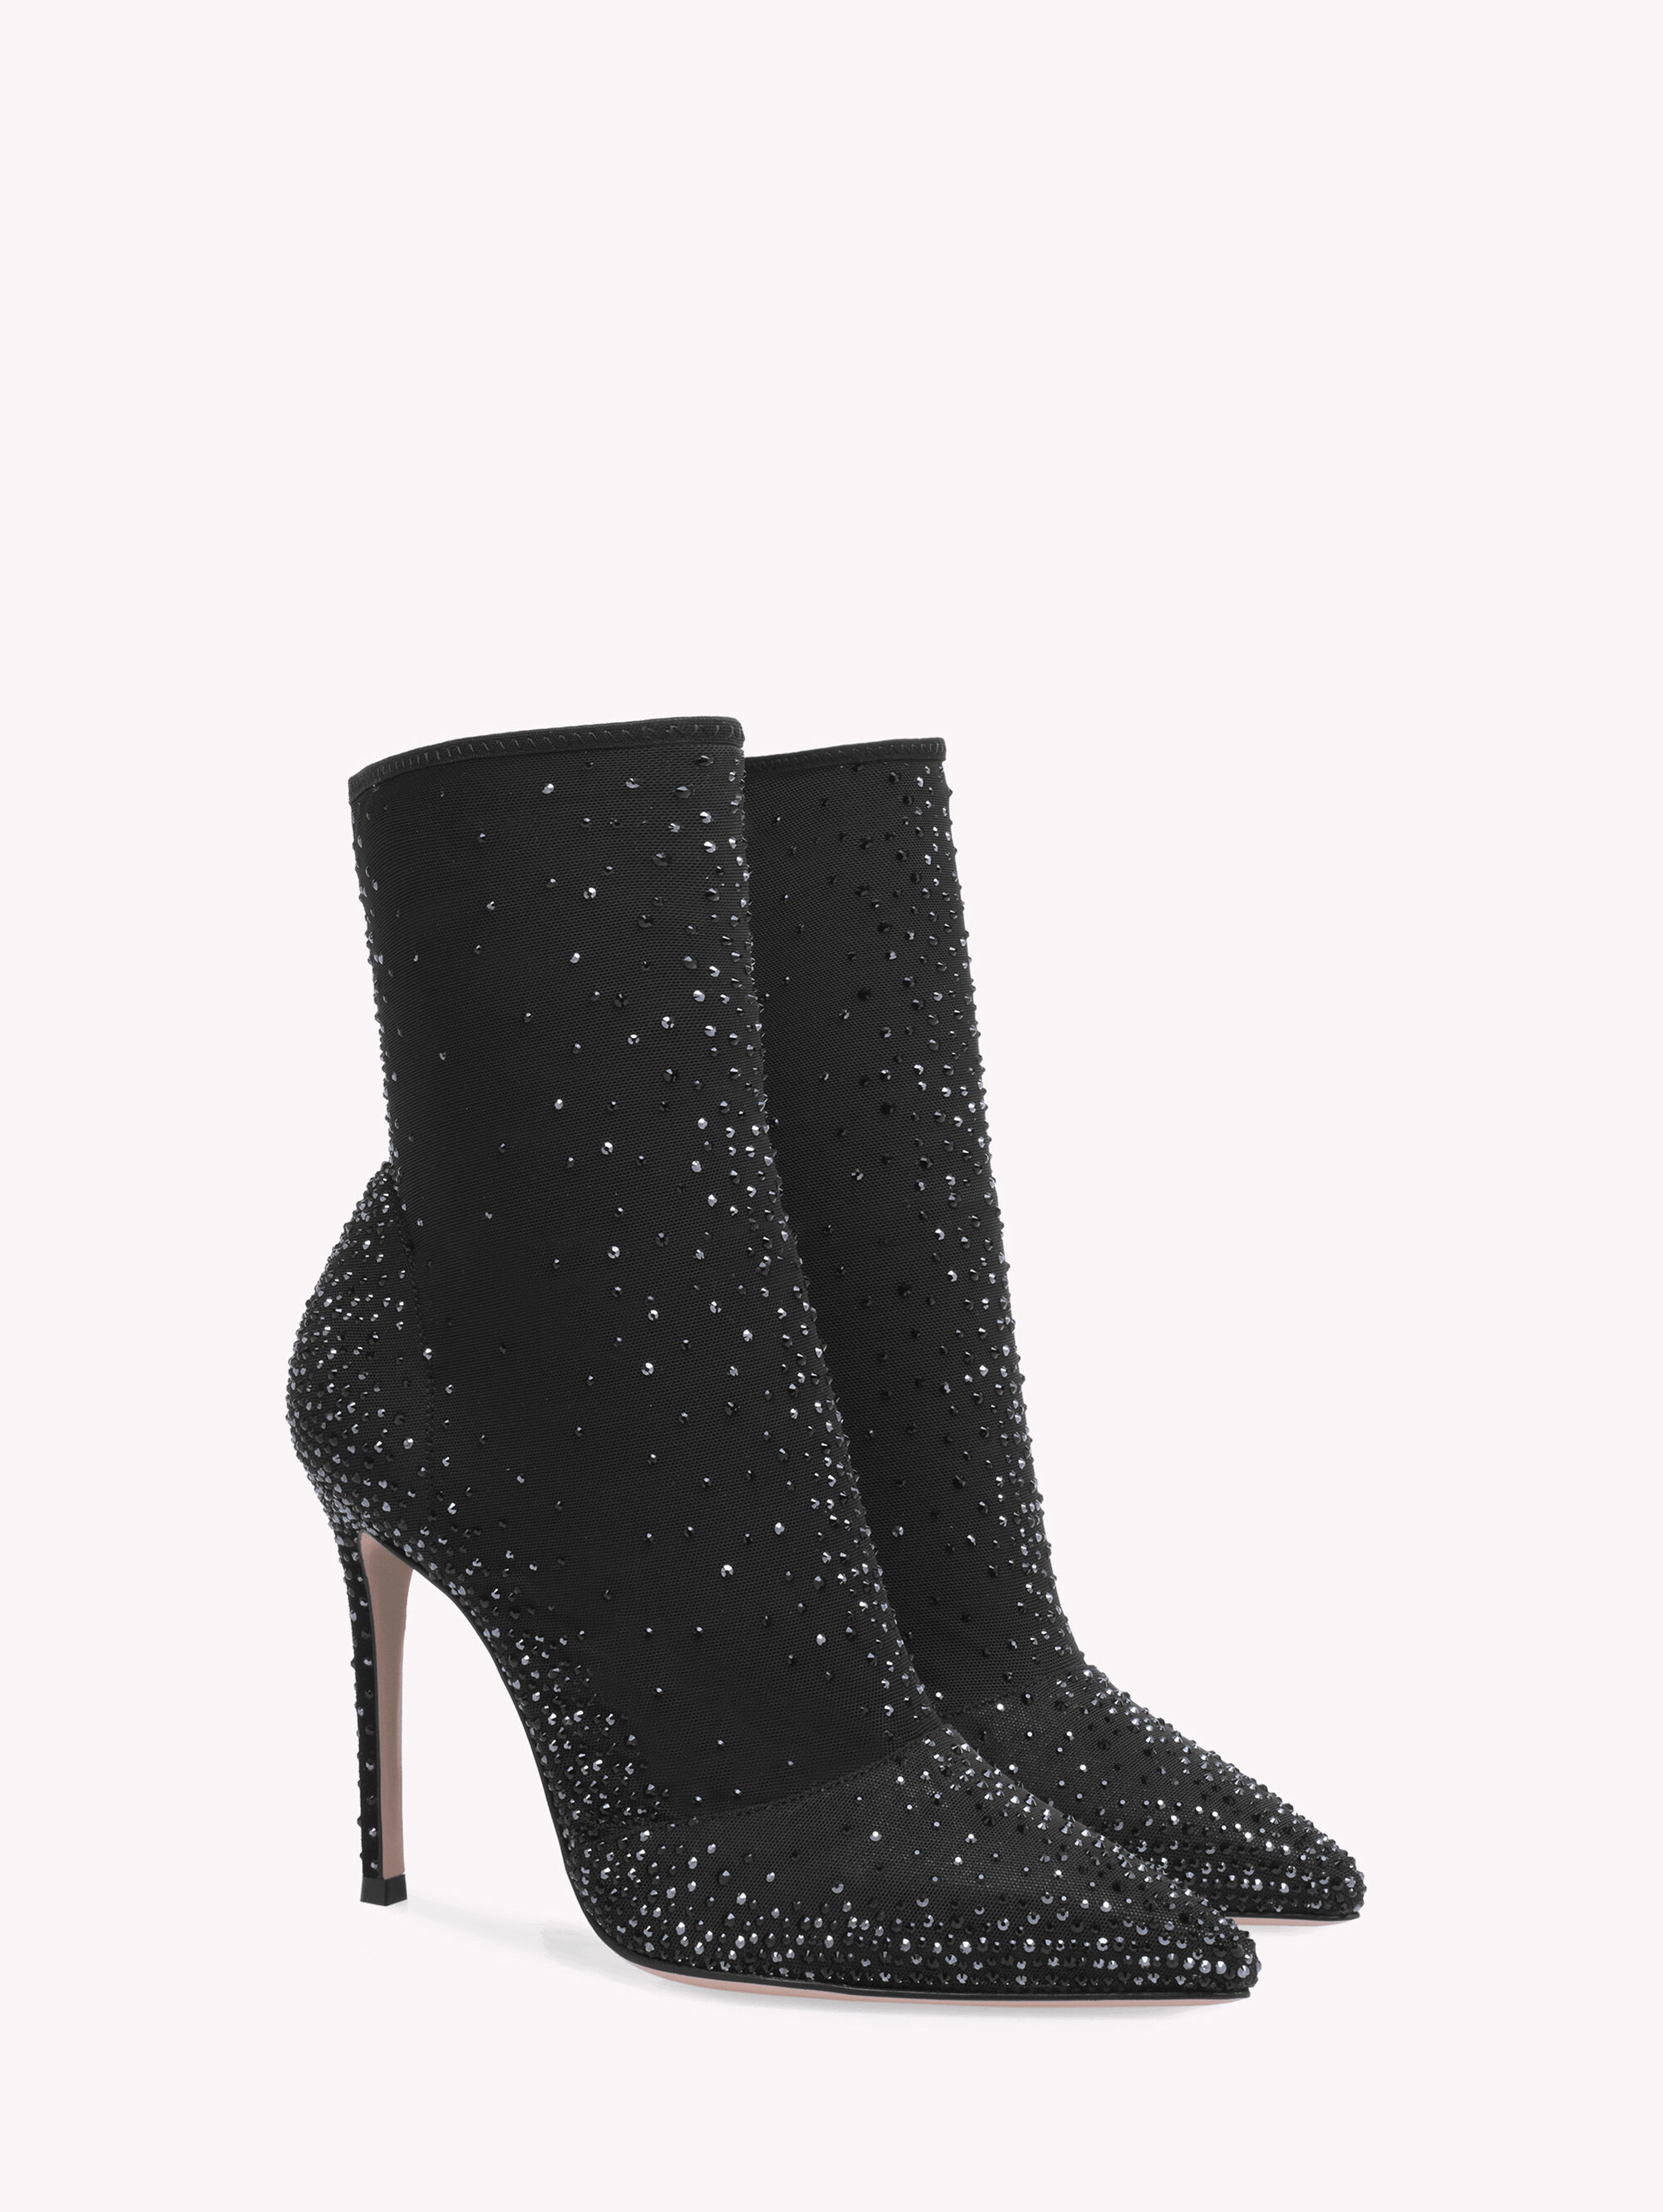 Ankle Boots for Women AURORA | Gianvito Rossi